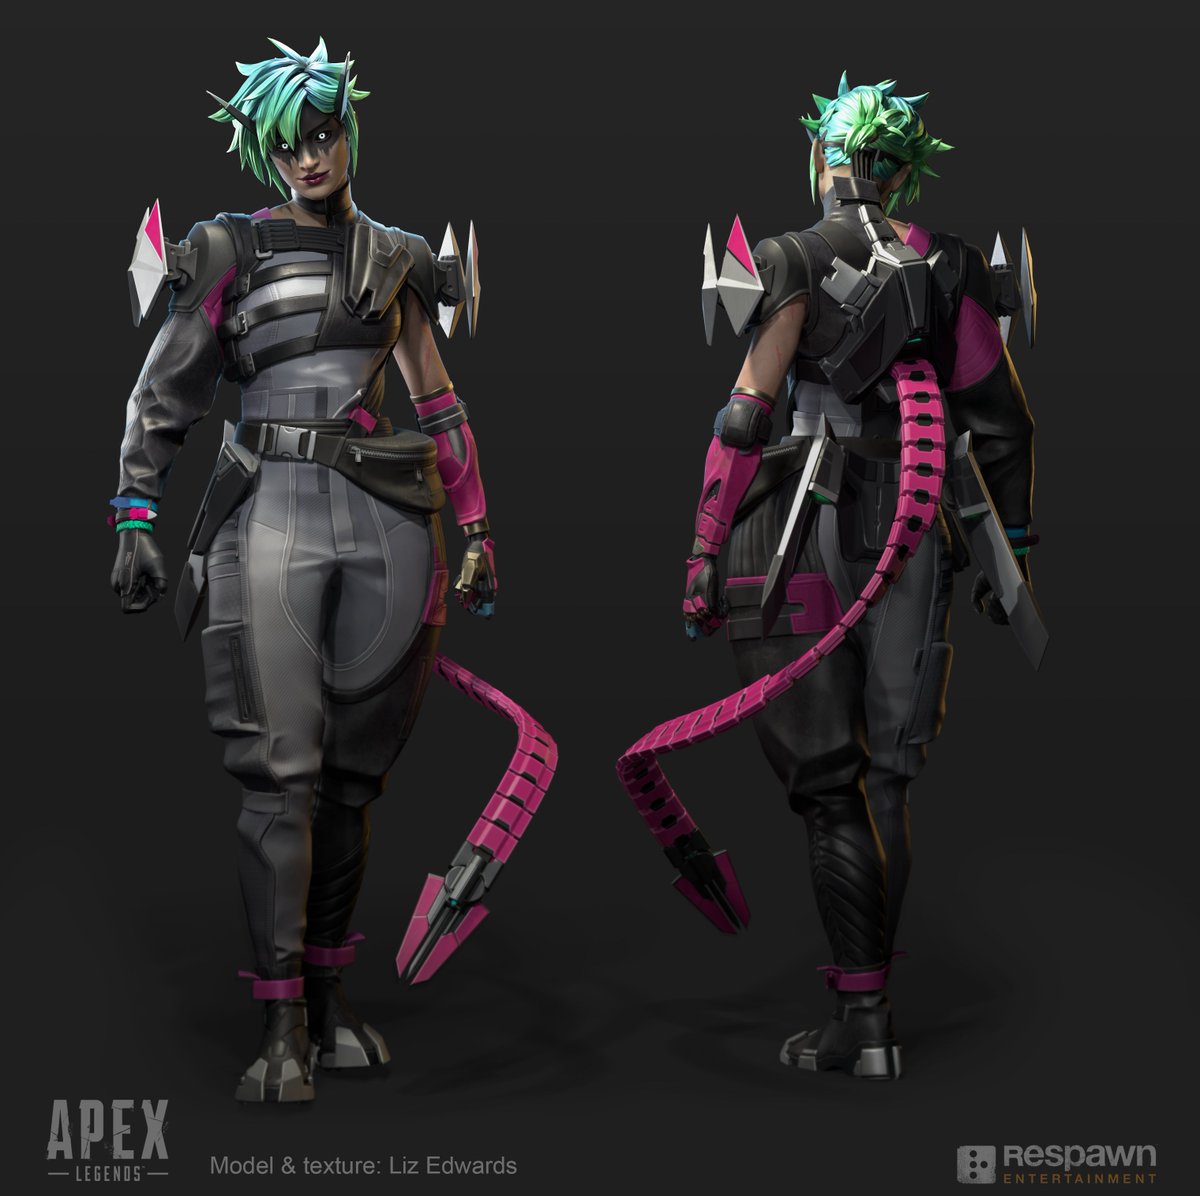 I had the honour of modelling Alter for Apex ✨

She is an incredible Legend and I'm so excited to main her in S21 😈